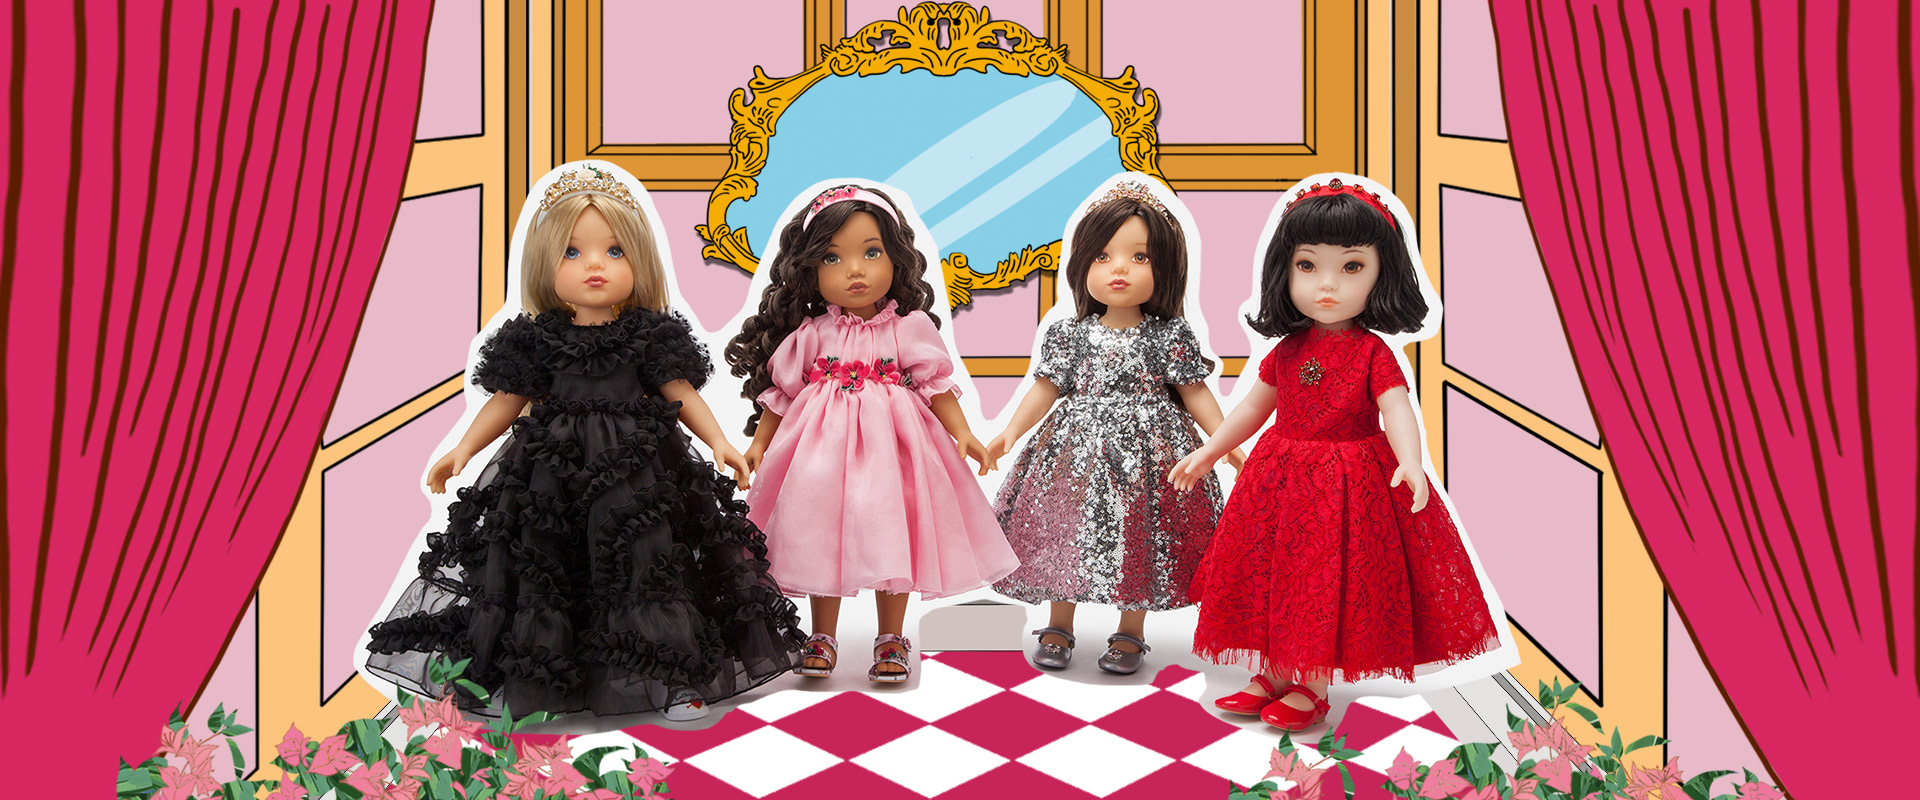 dolce-and-gabbana-winter-2020-dolls-mini-me-top-banner